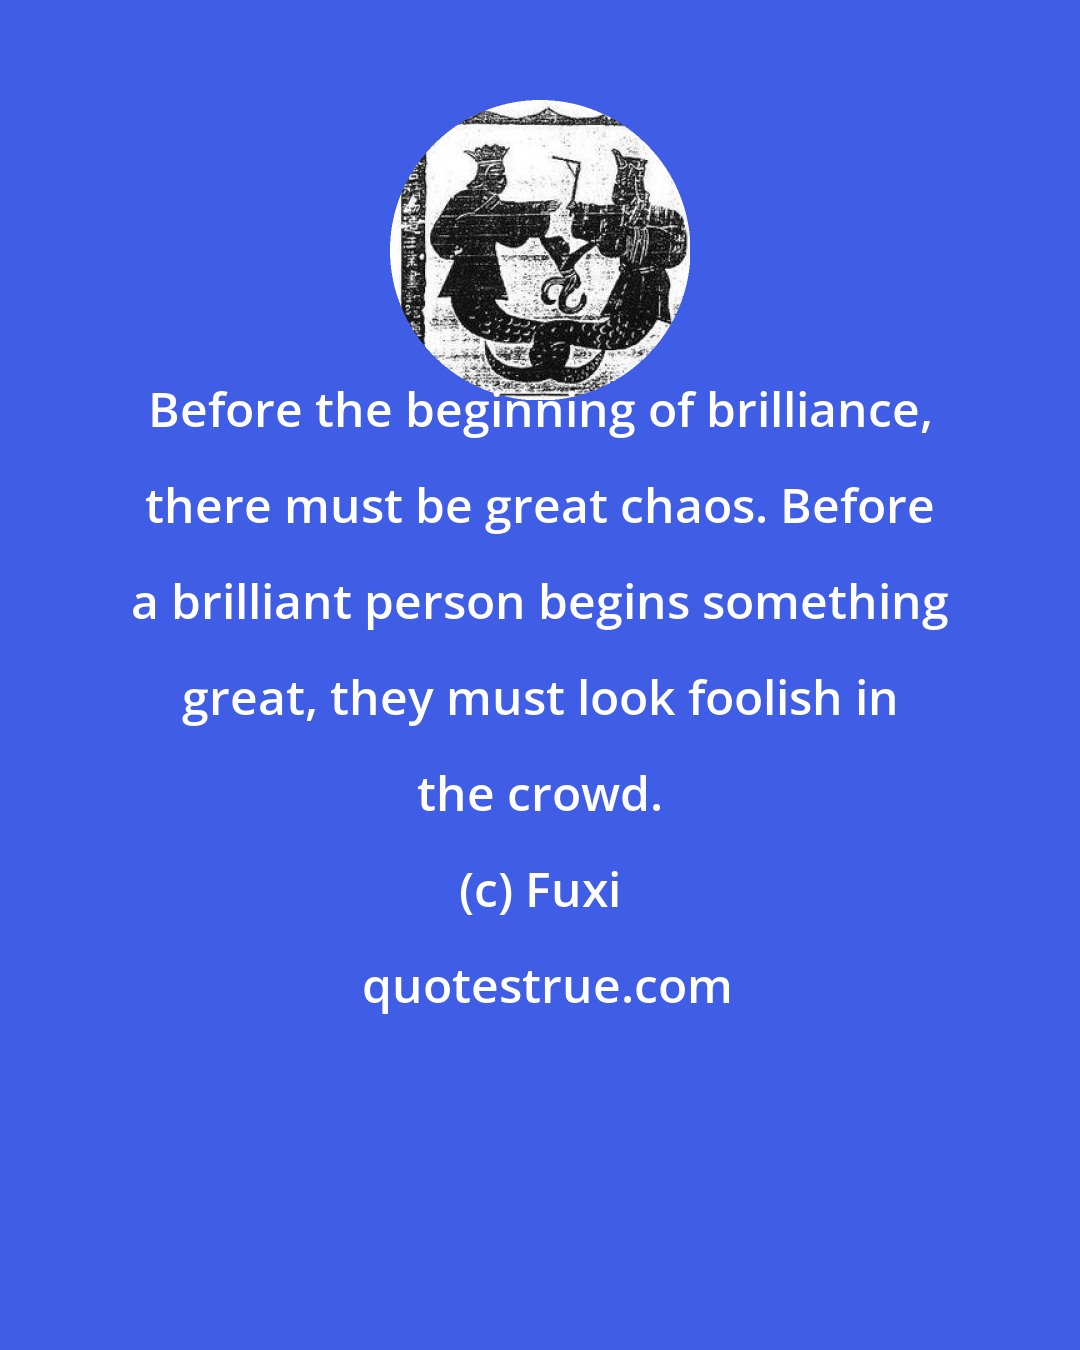 Fuxi: Before the beginning of brilliance, there must be great chaos. Before a brilliant person begins something great, they must look foolish in the crowd.